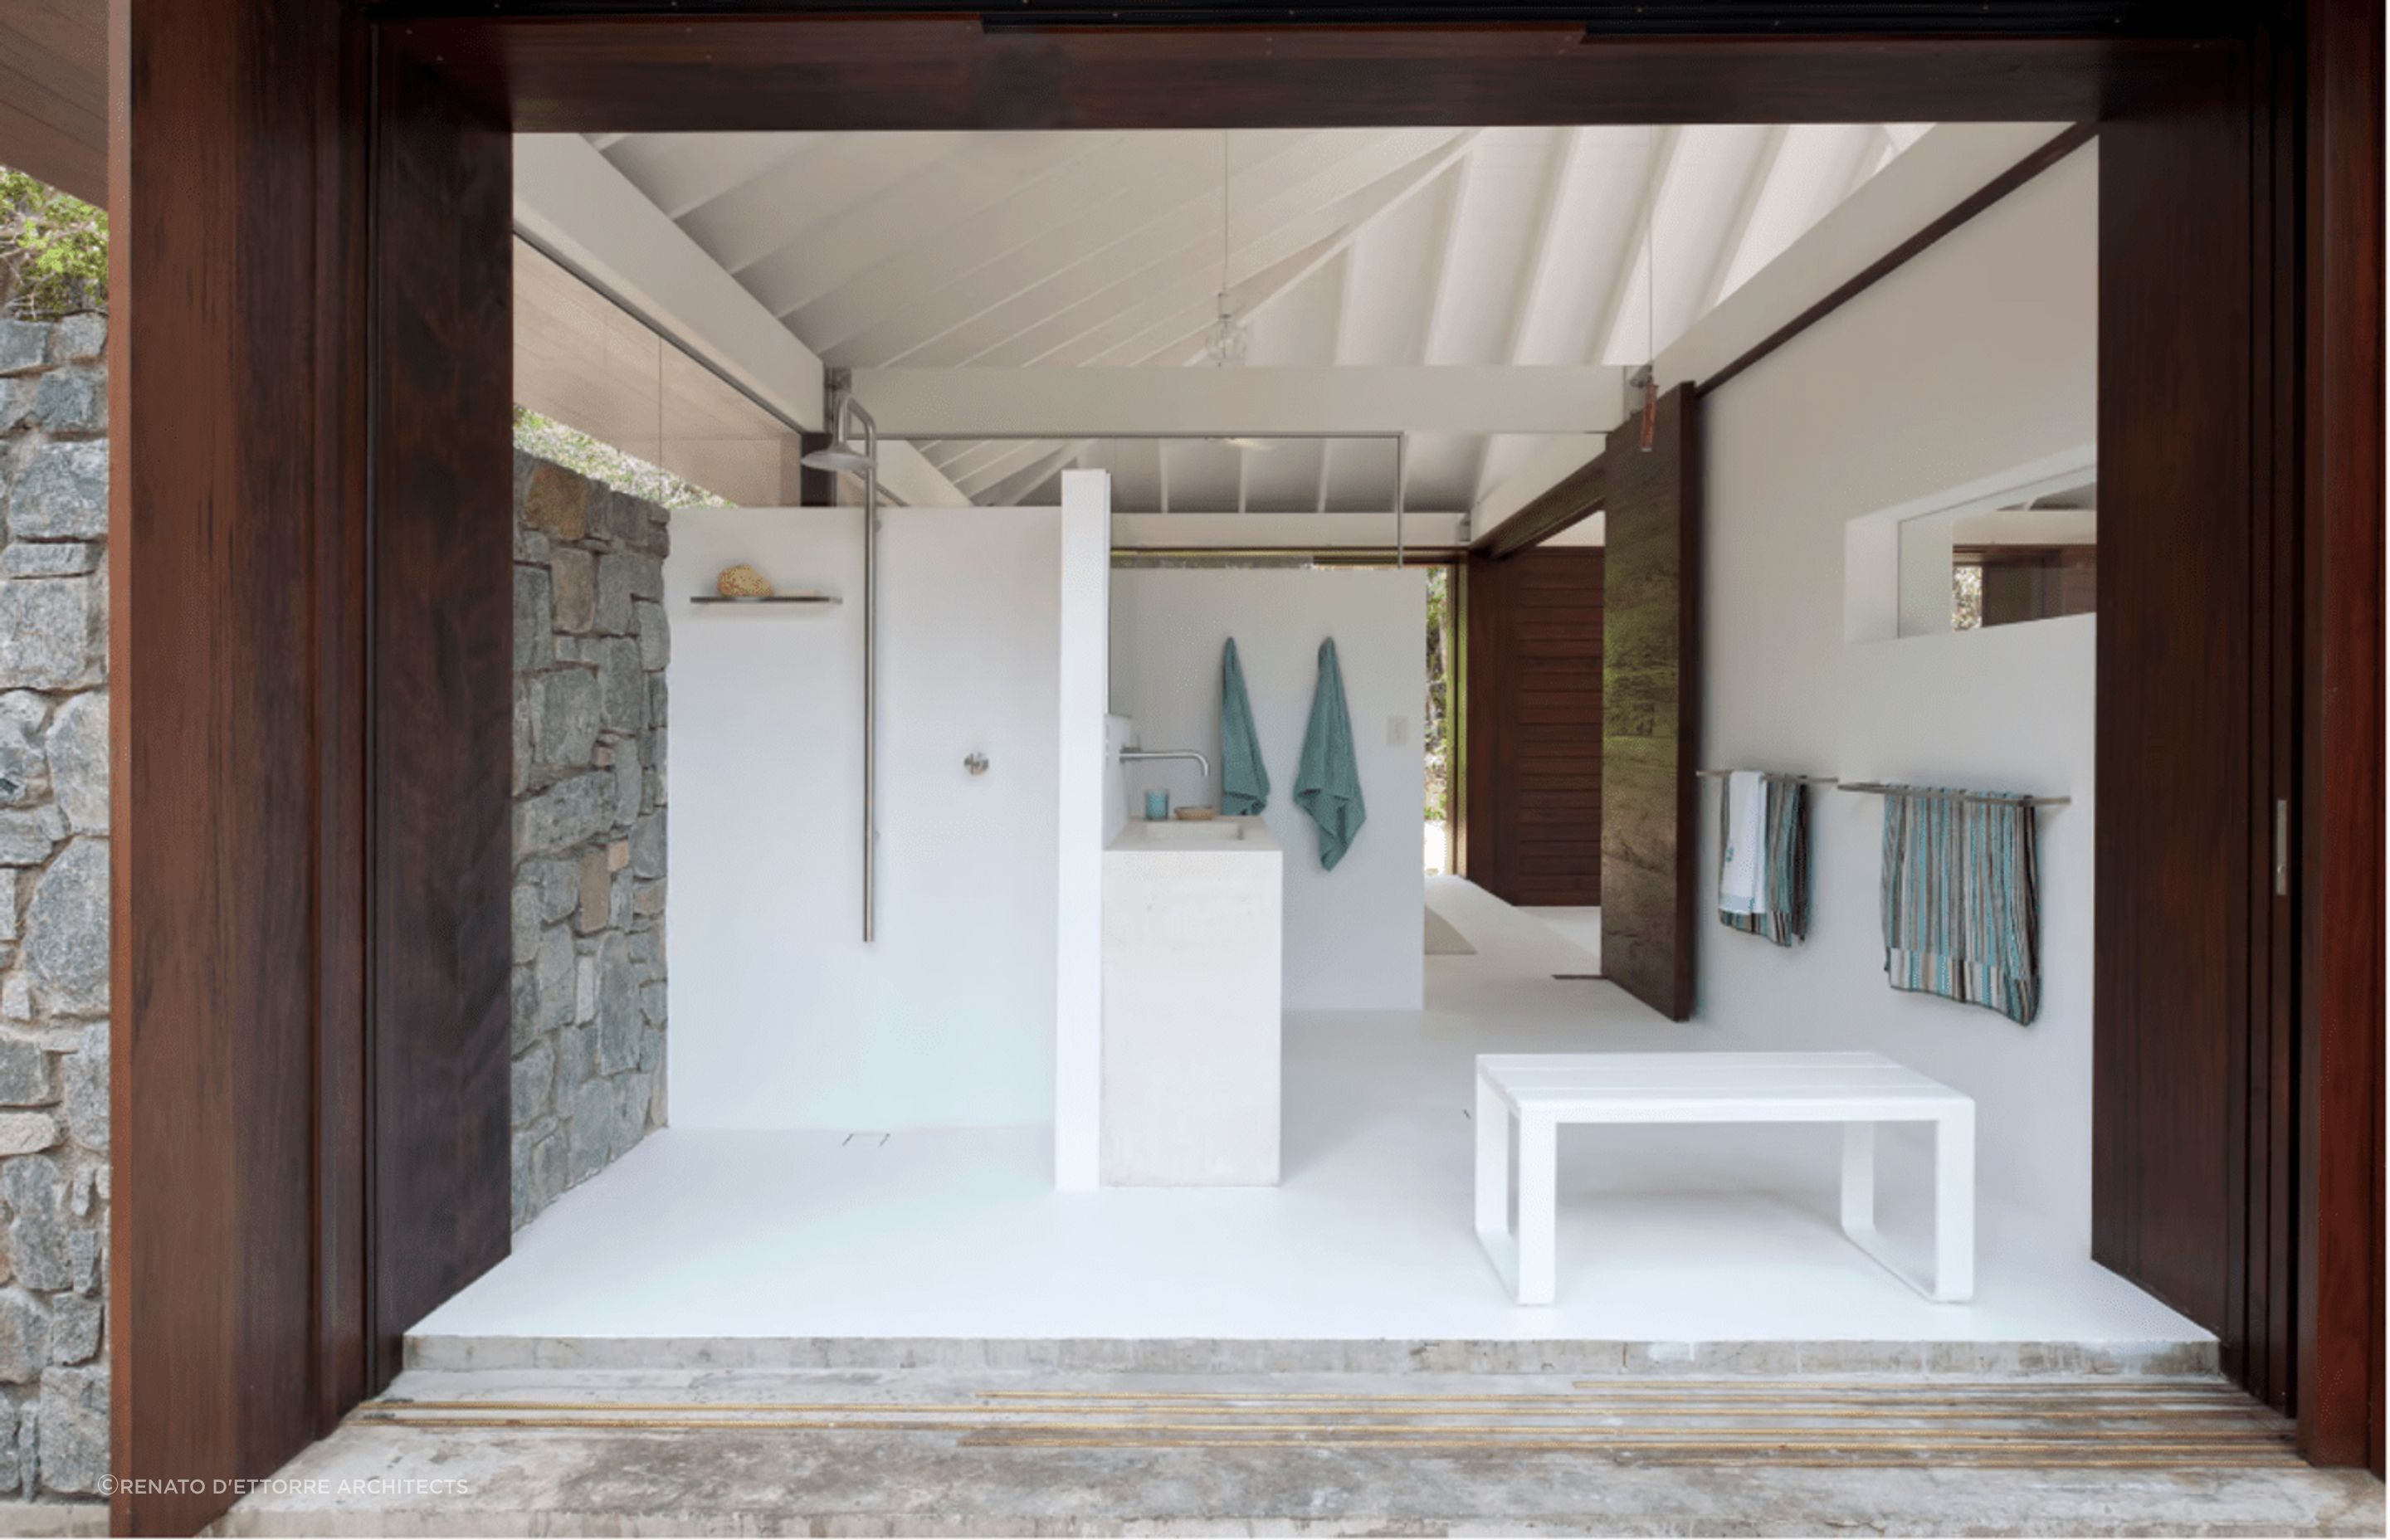 Open style coastal bathrooms work particularly well in beach style huts, or single level beach houses.